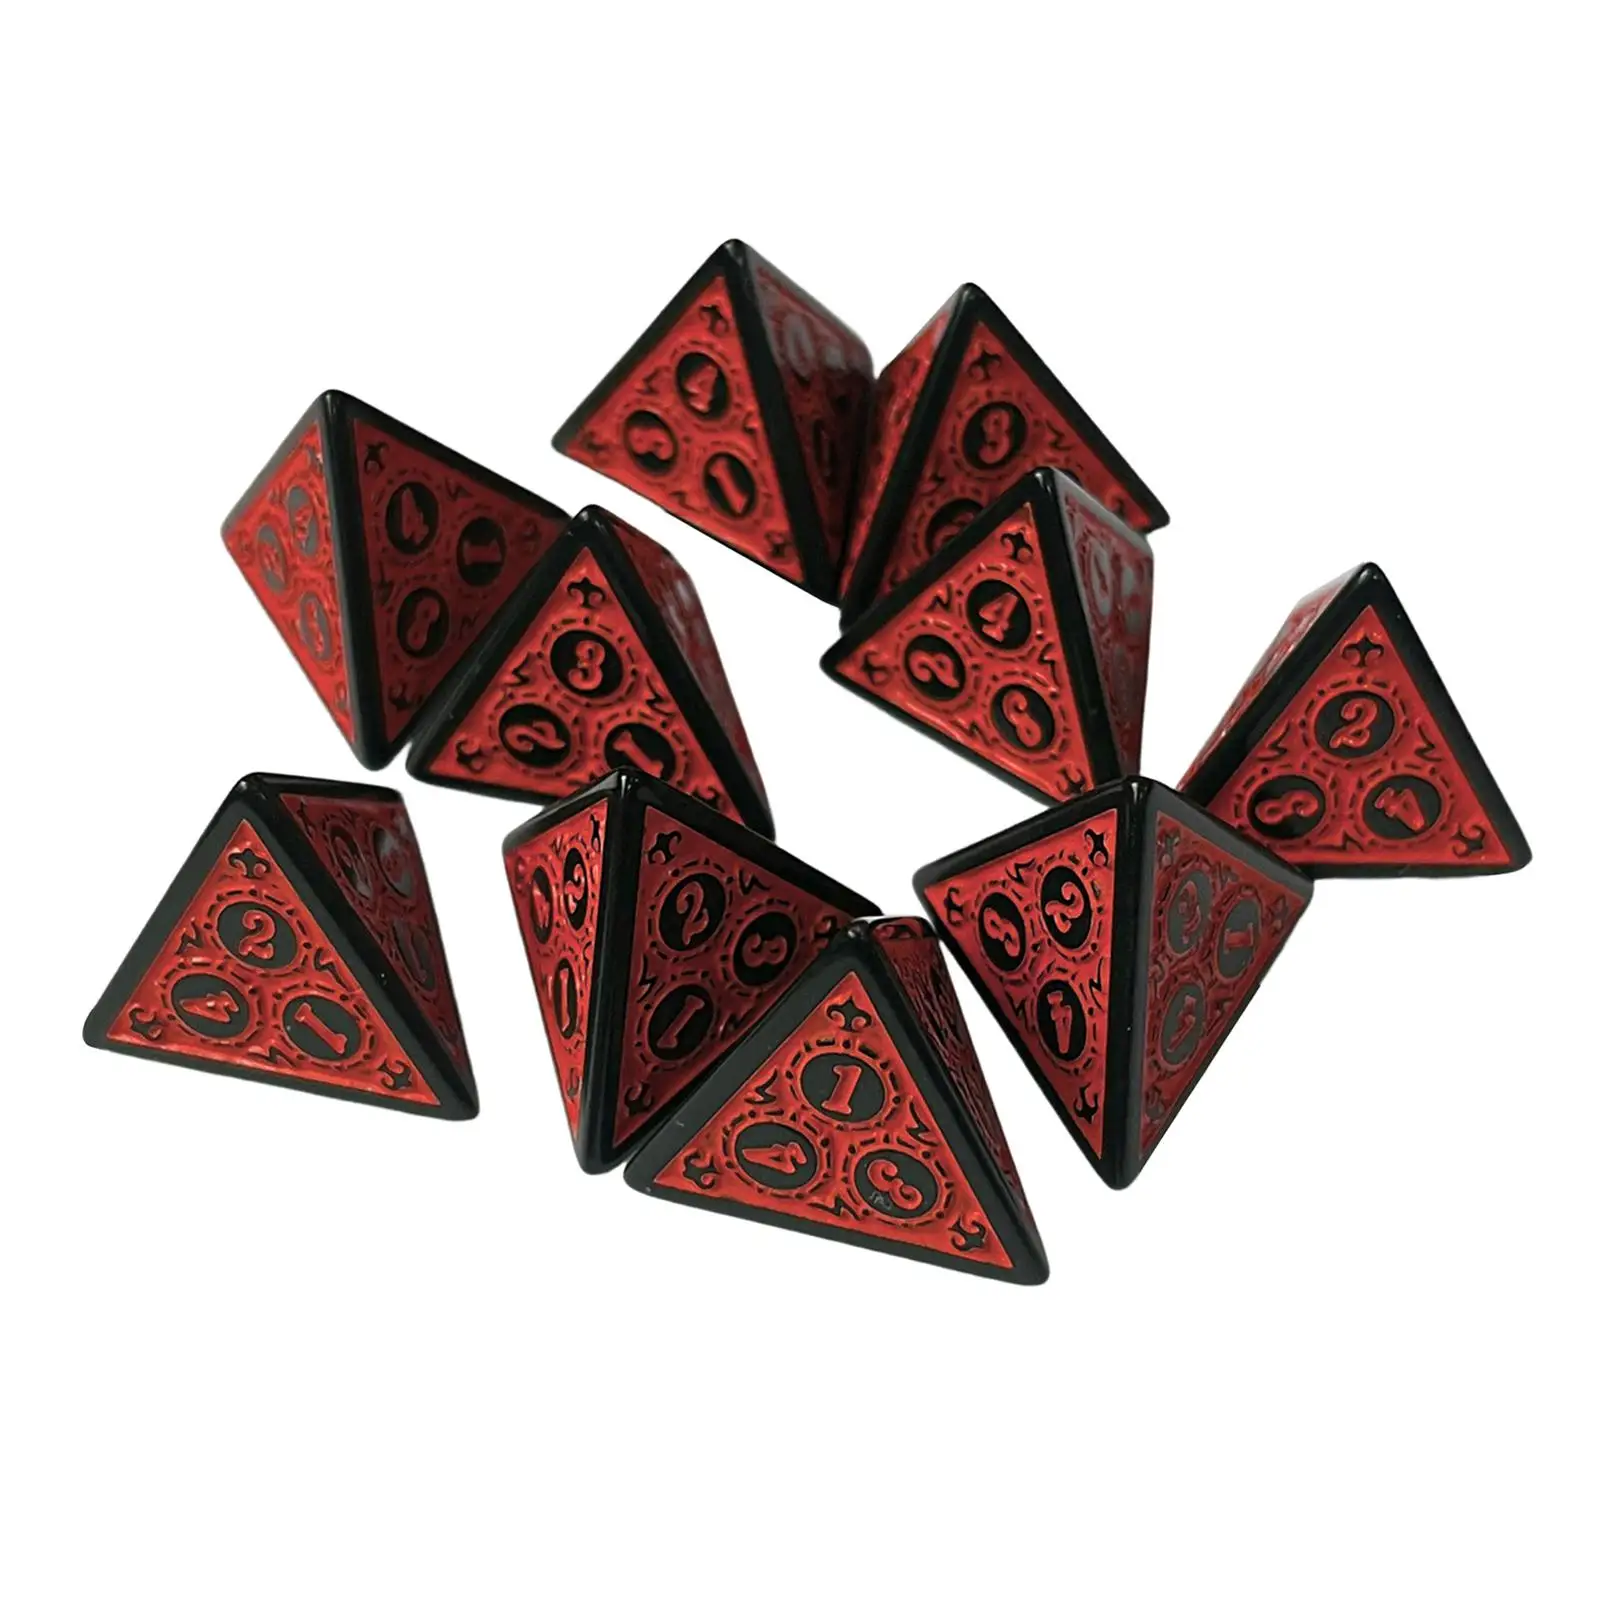 10x 4 Sided Game Dices Table Games Classroom Accessories Bar Toys Acrylic D4 Dices